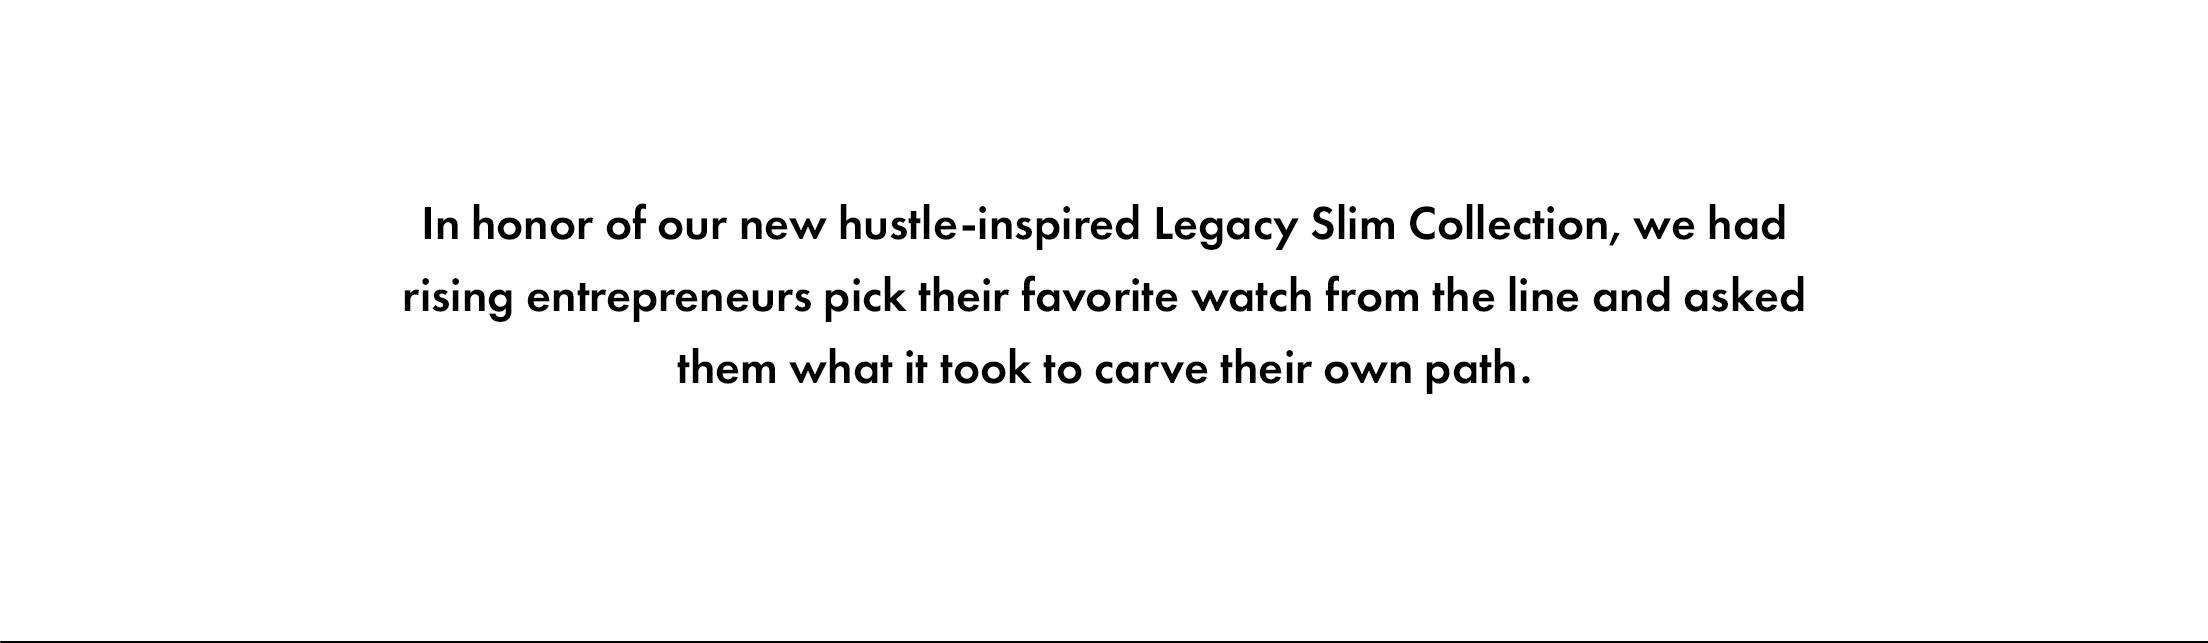 In honor of our new hustle-inspired Legacy Slim Collection, we had rising entrepreneurs pick their favorite watch from the line and asked them what it took to carve their own path.